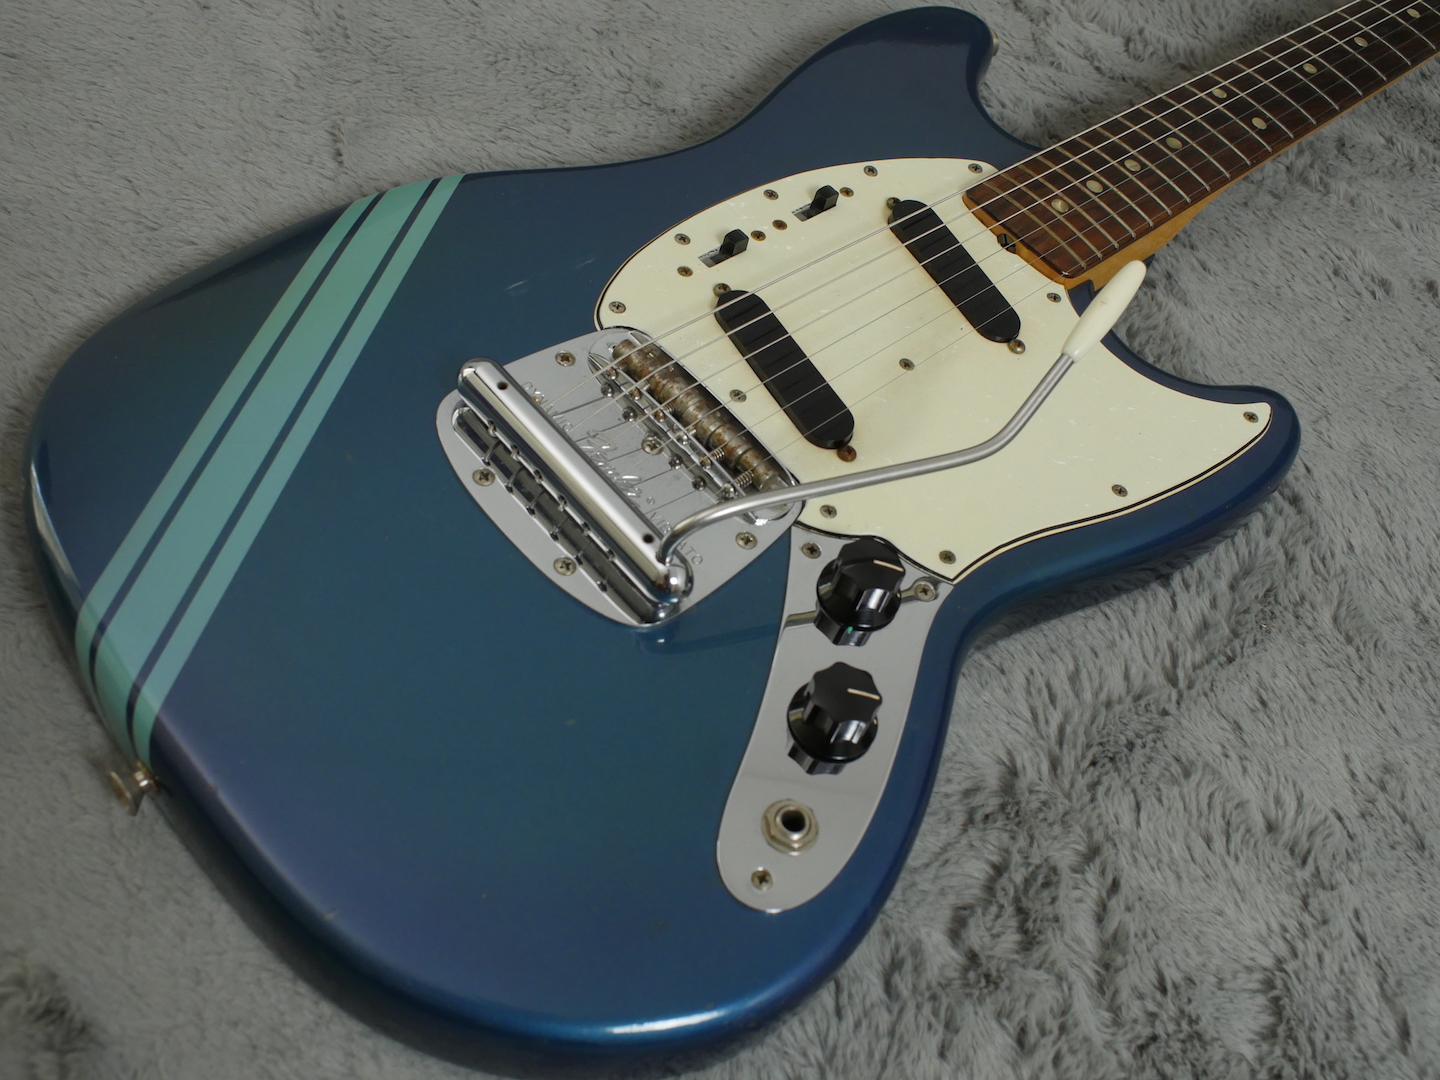 Fender Mustang Competition 1969 Blue Guitar For Sale ATB Guitars